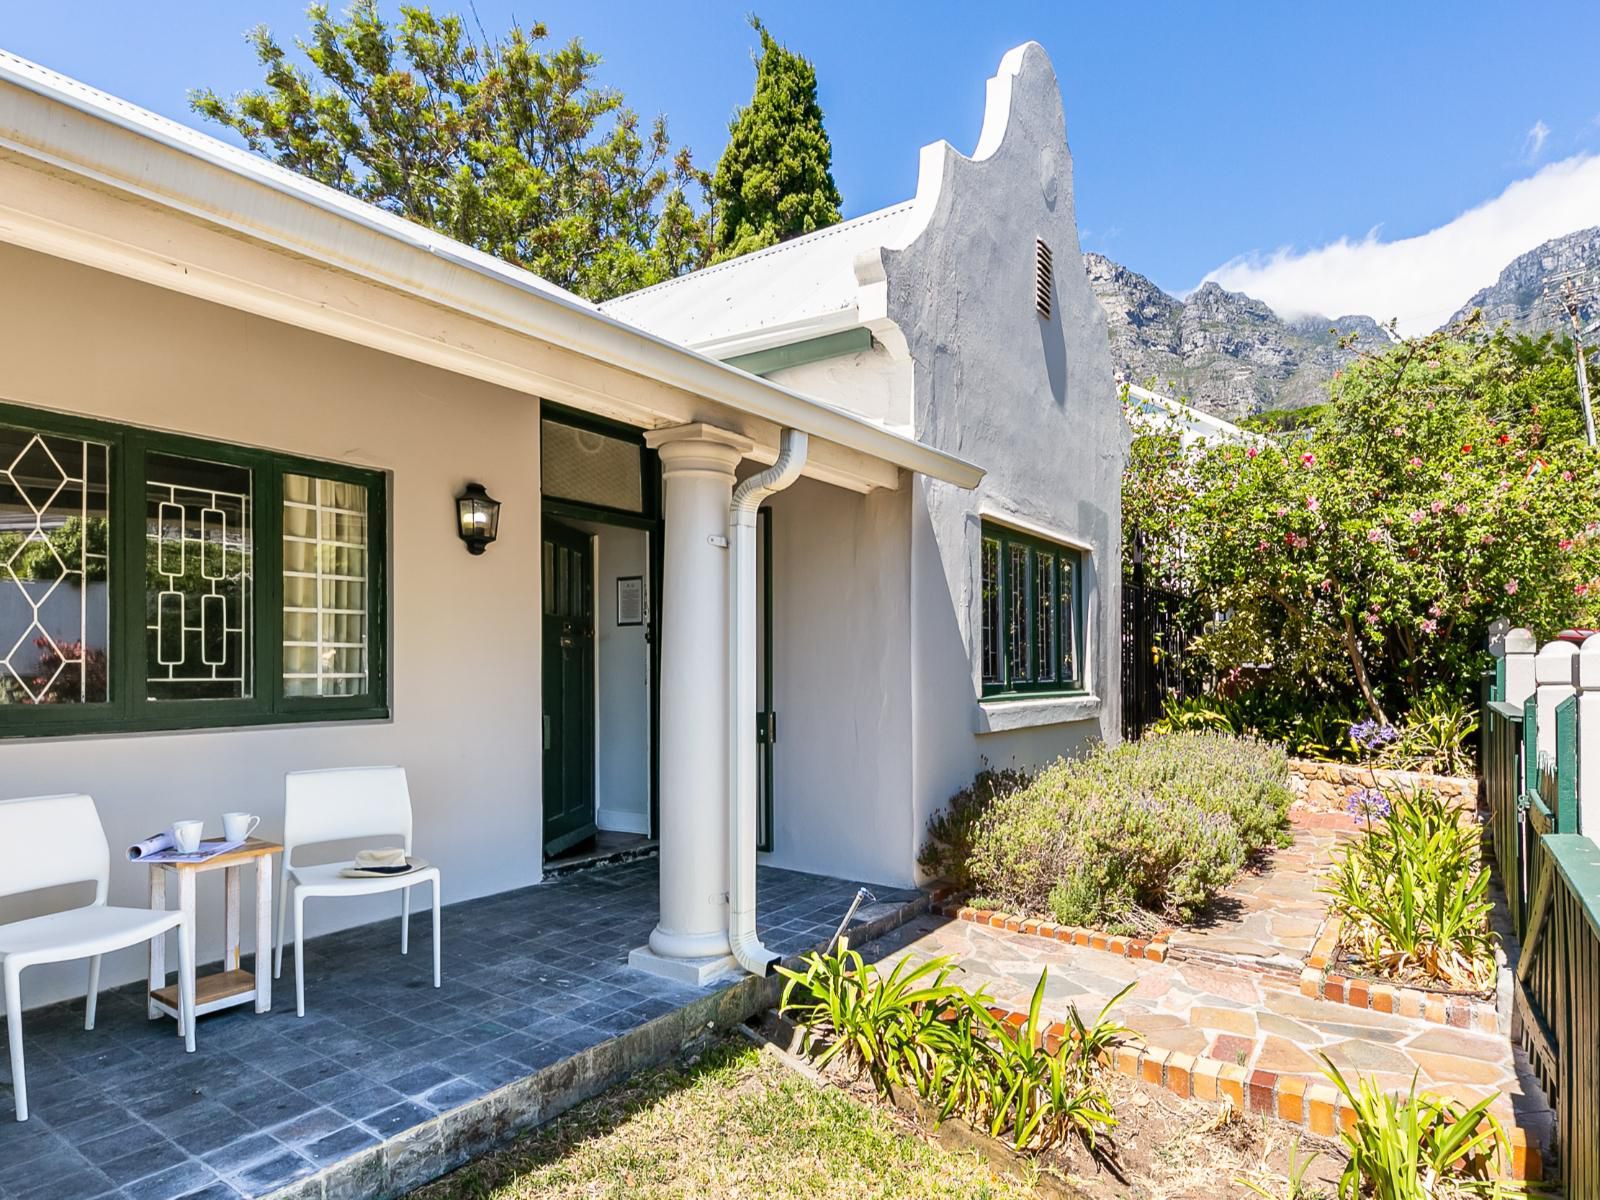 Camps Bay Village Camps Bay Cape Town Western Cape South Africa House, Building, Architecture